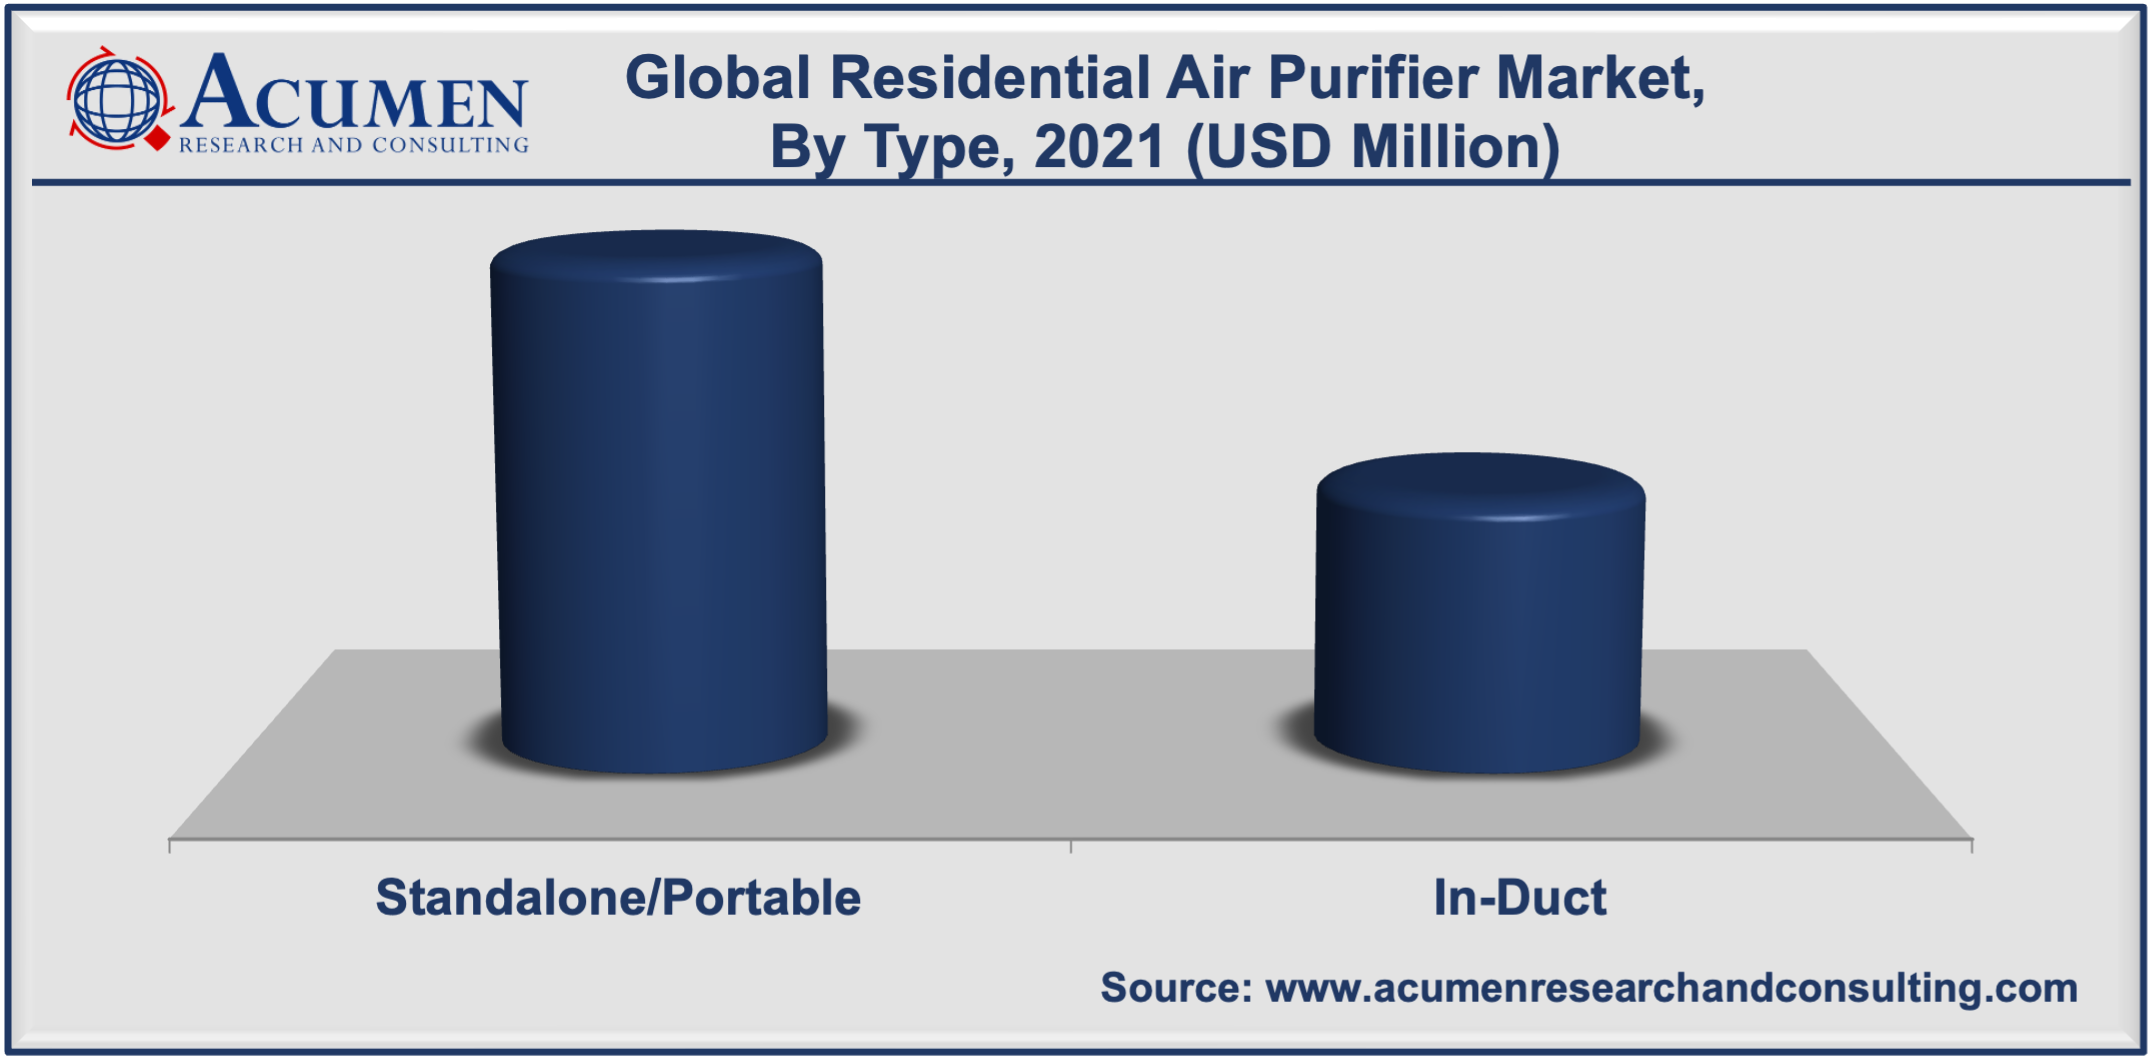 Residential Air Purifier Market Share accounted for USD 3,260 Million in 2021 and is estimated to reach USD 6,648 Million by 2030.